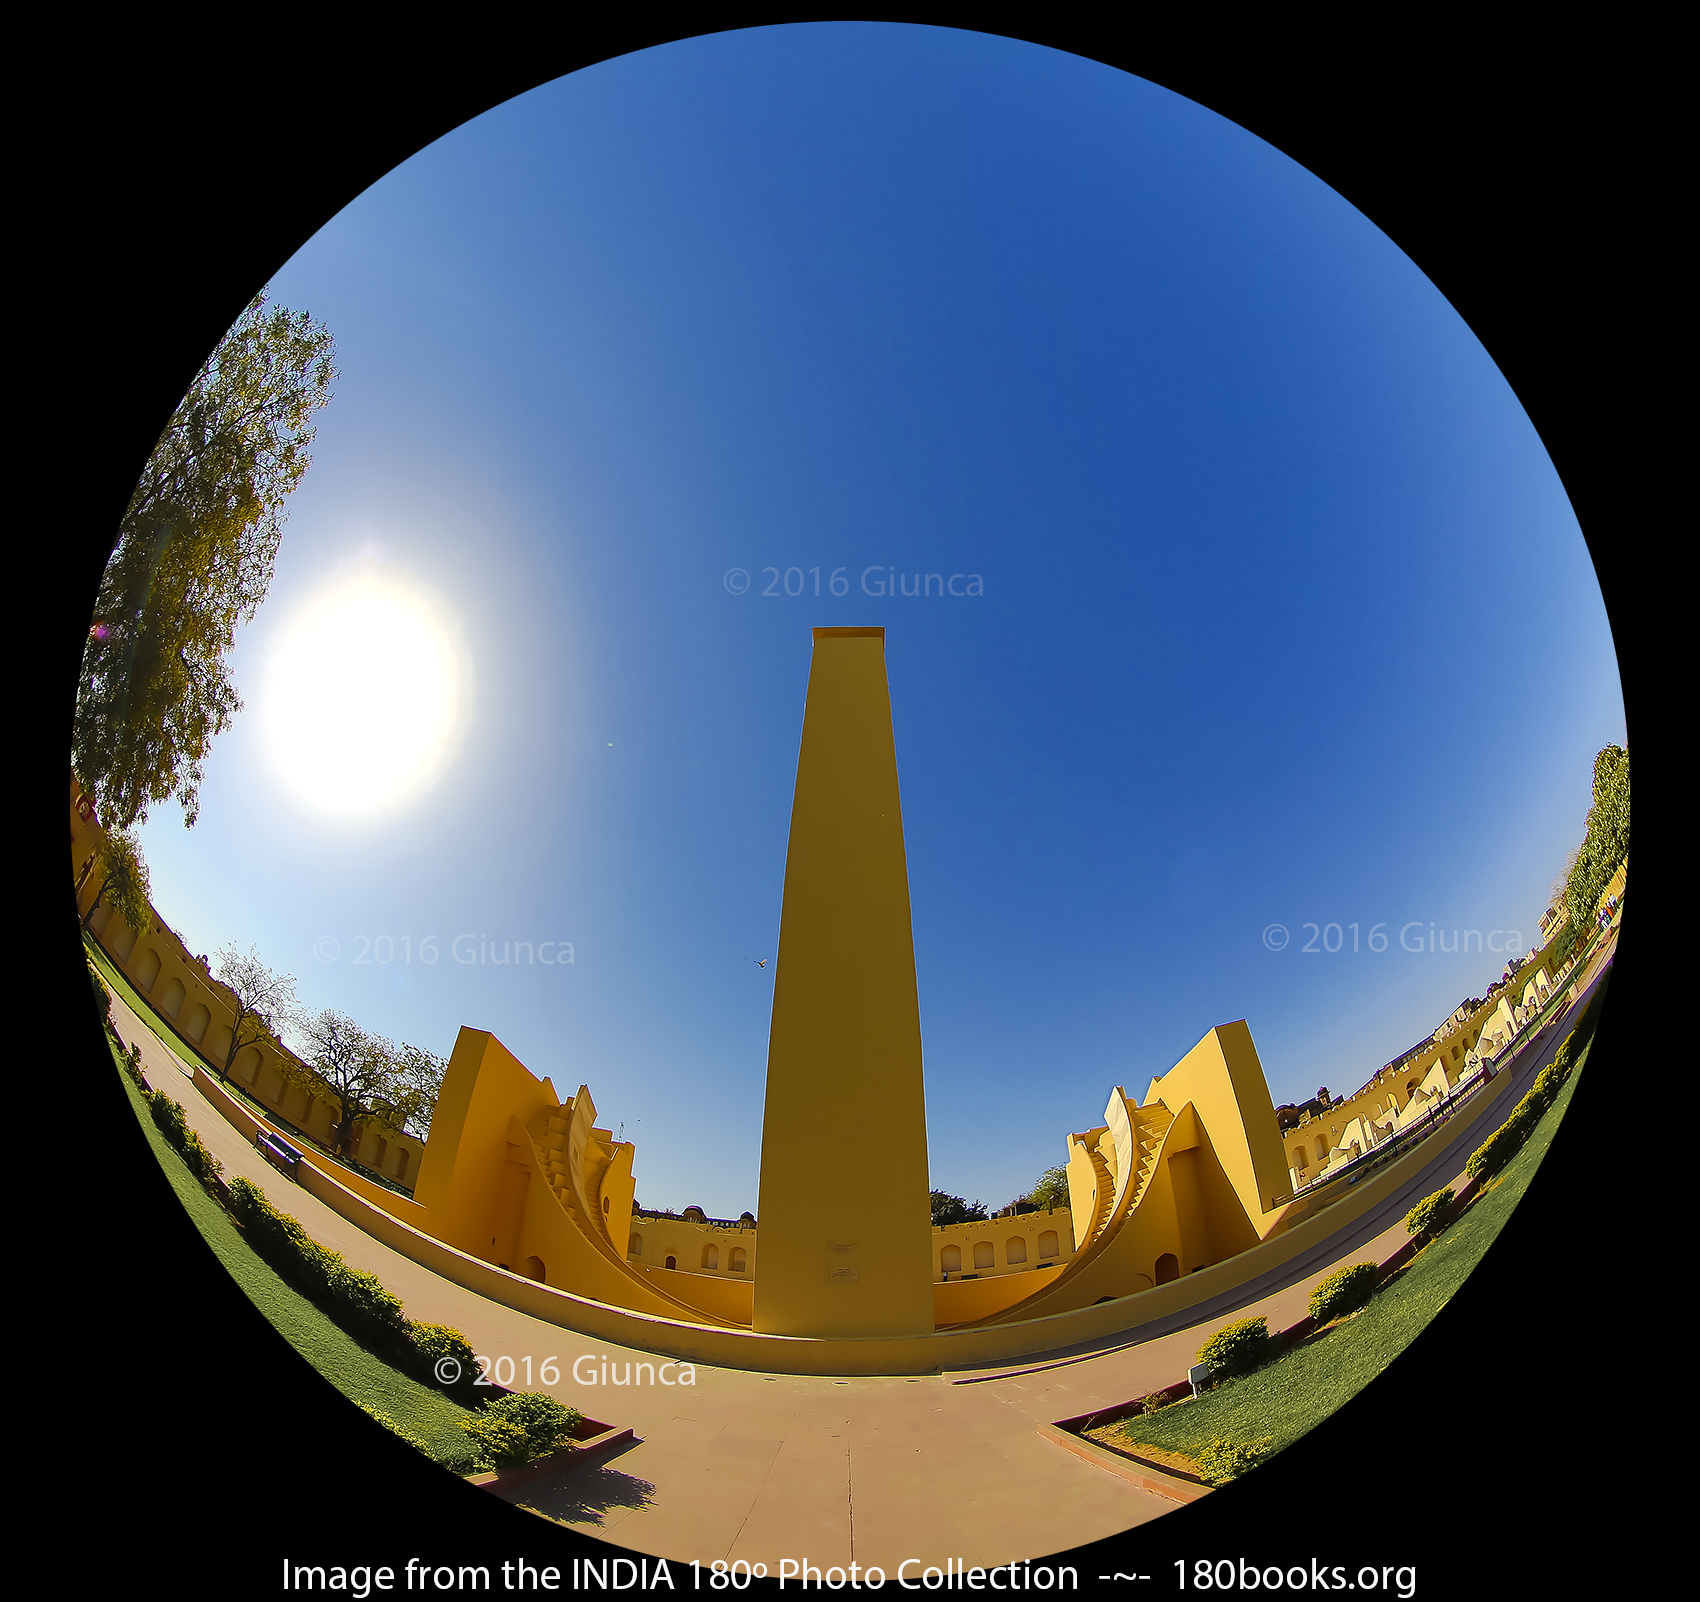 Image of The Huge Sundial in the Jantar Mantar in Jaipur, India.